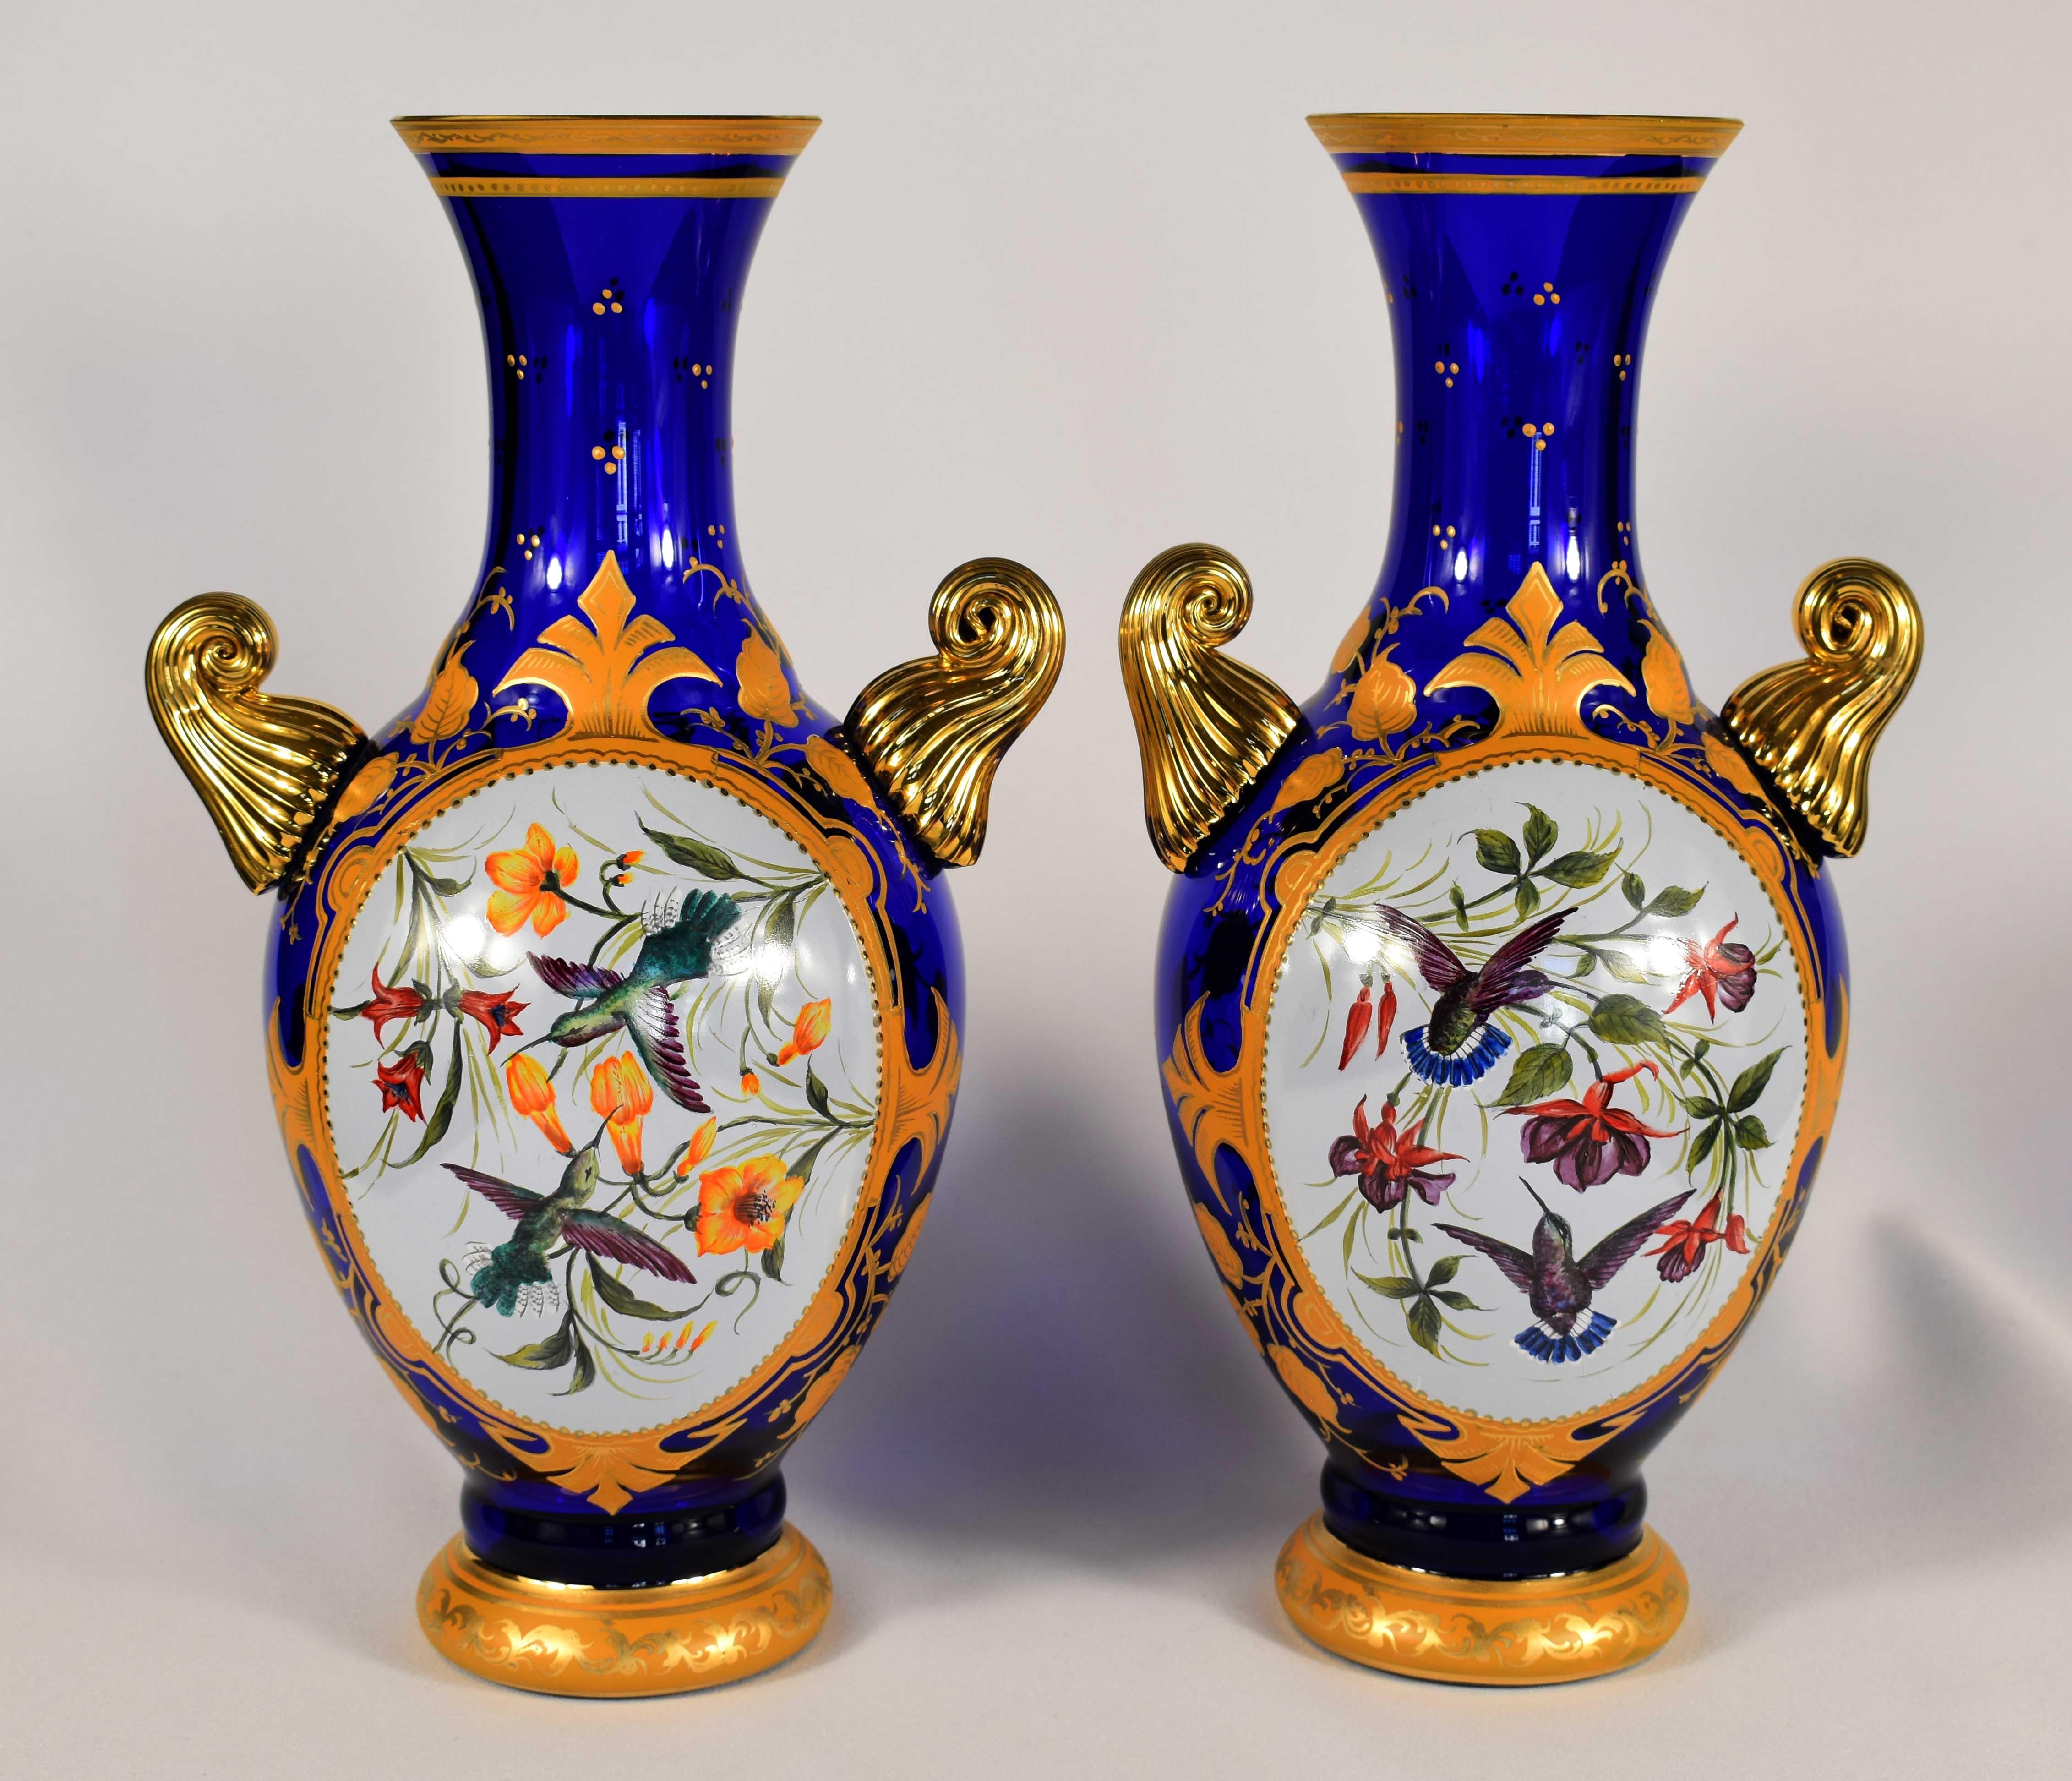 A beautiful pair of blue hand-painted vases with the motif of exotic birds, there is also a painted and gilded ornamental motif and leaves, everything is 100% handmade, They are made in antique style, This is Bohemian glass 20th century, It is an